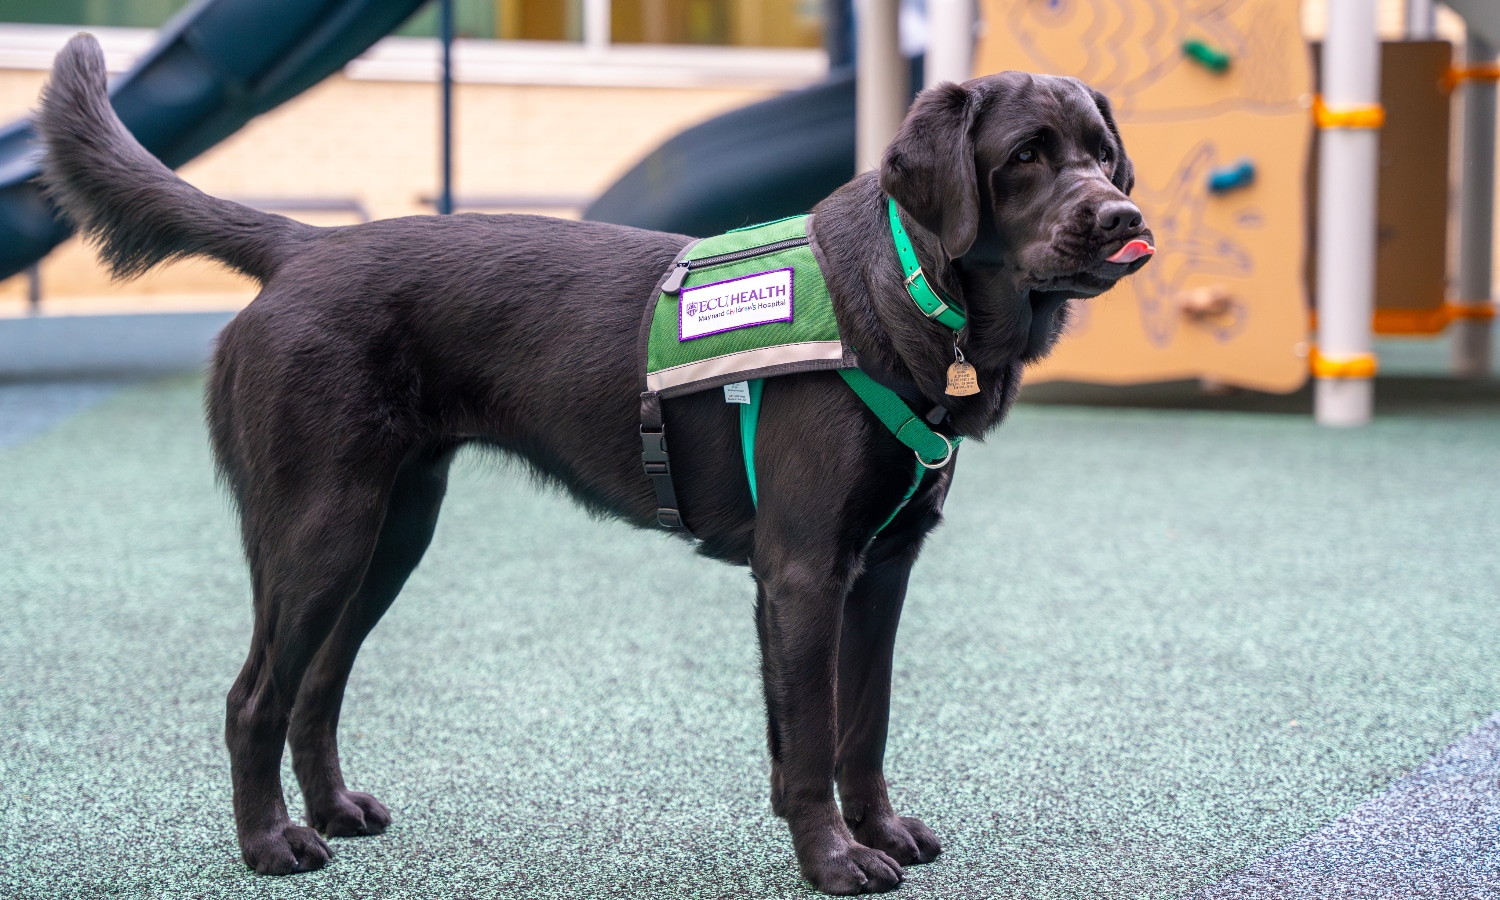 Sam, a therapy dog with the Maynard Canine Crew, stands on the playground at Maynard Children's Hospital.